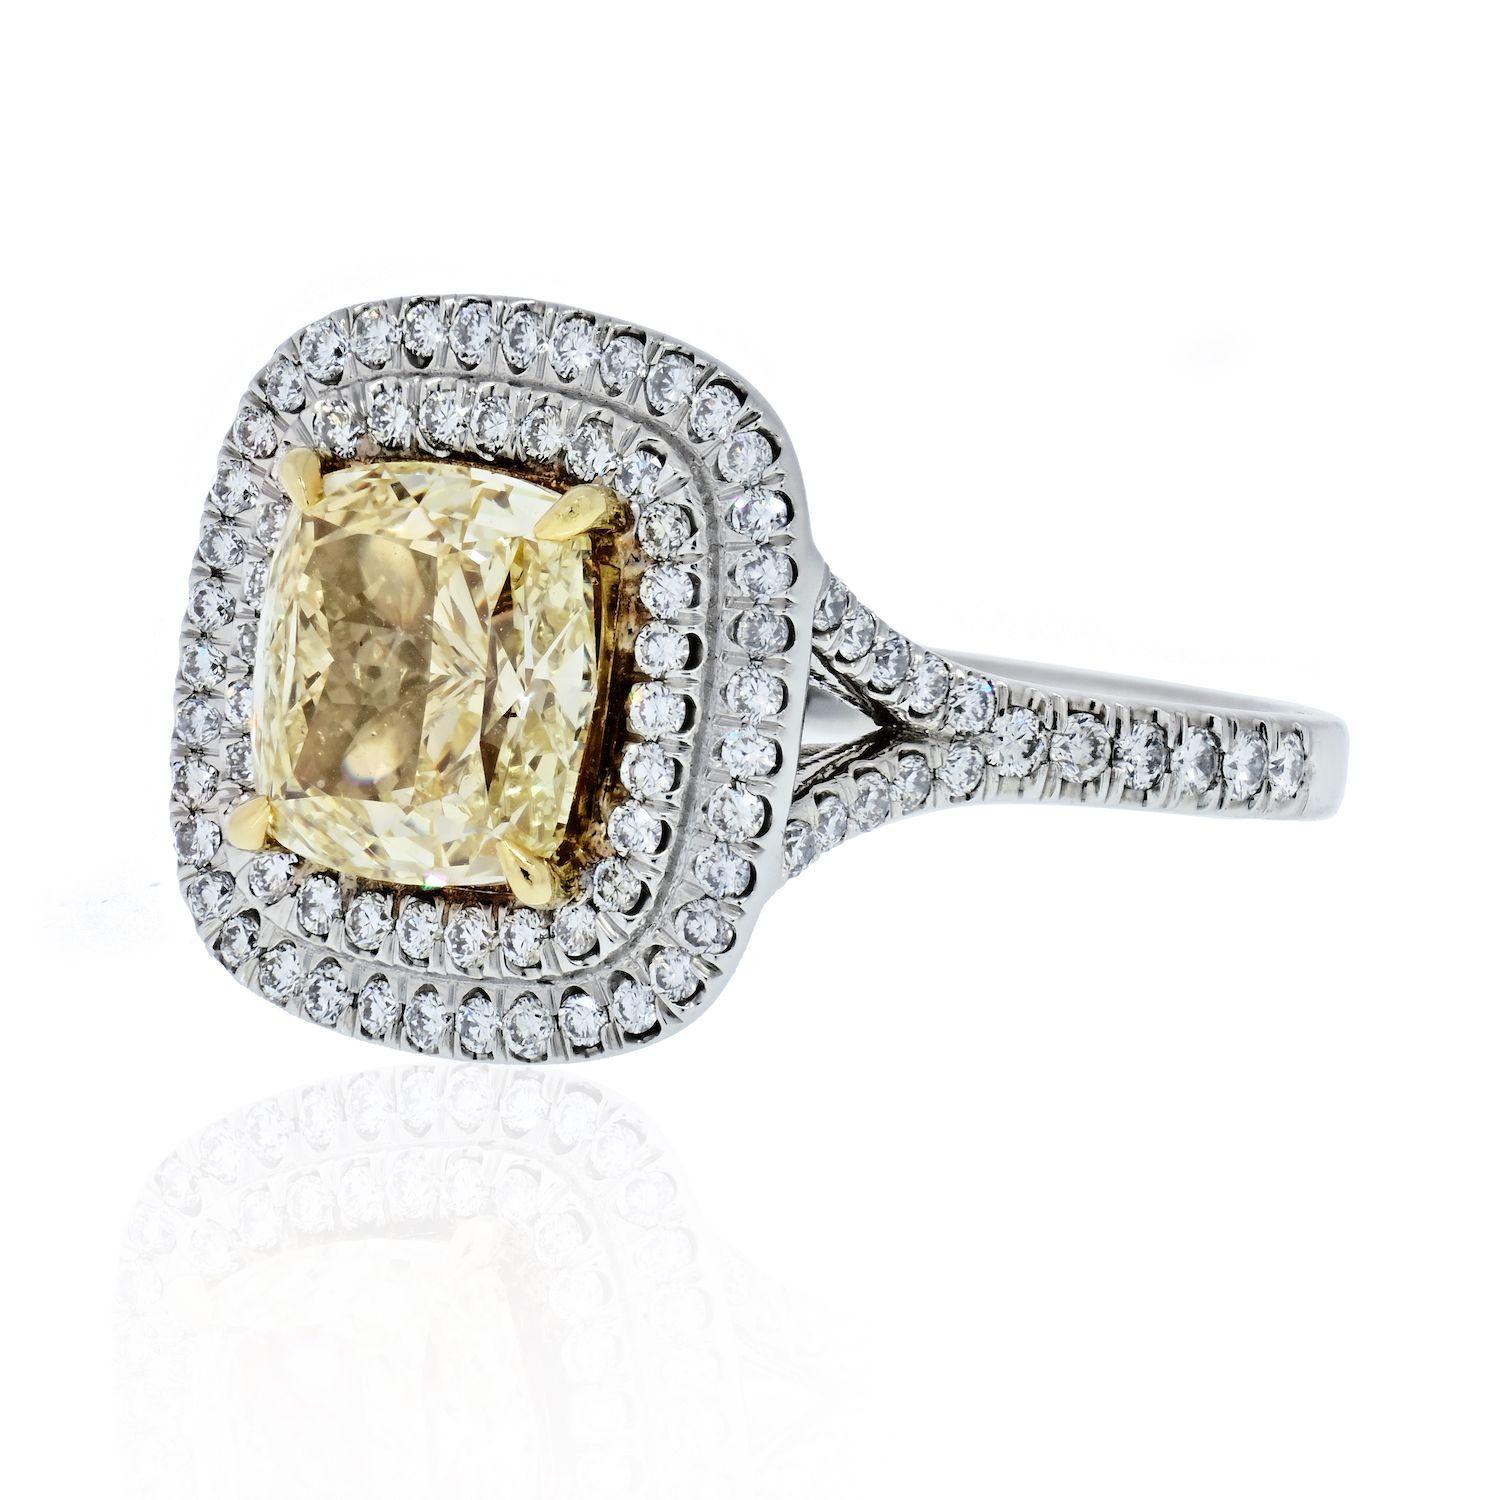 Few things are as darling and dreamy as a cushion-cut fancy yellow diamond, and a cushion-cut fancy yellow diamond surrounded by a gorgeous double halo of small, colorless round diamonds is one of them.
This Cushion Shaped Fancy Intense Yellow